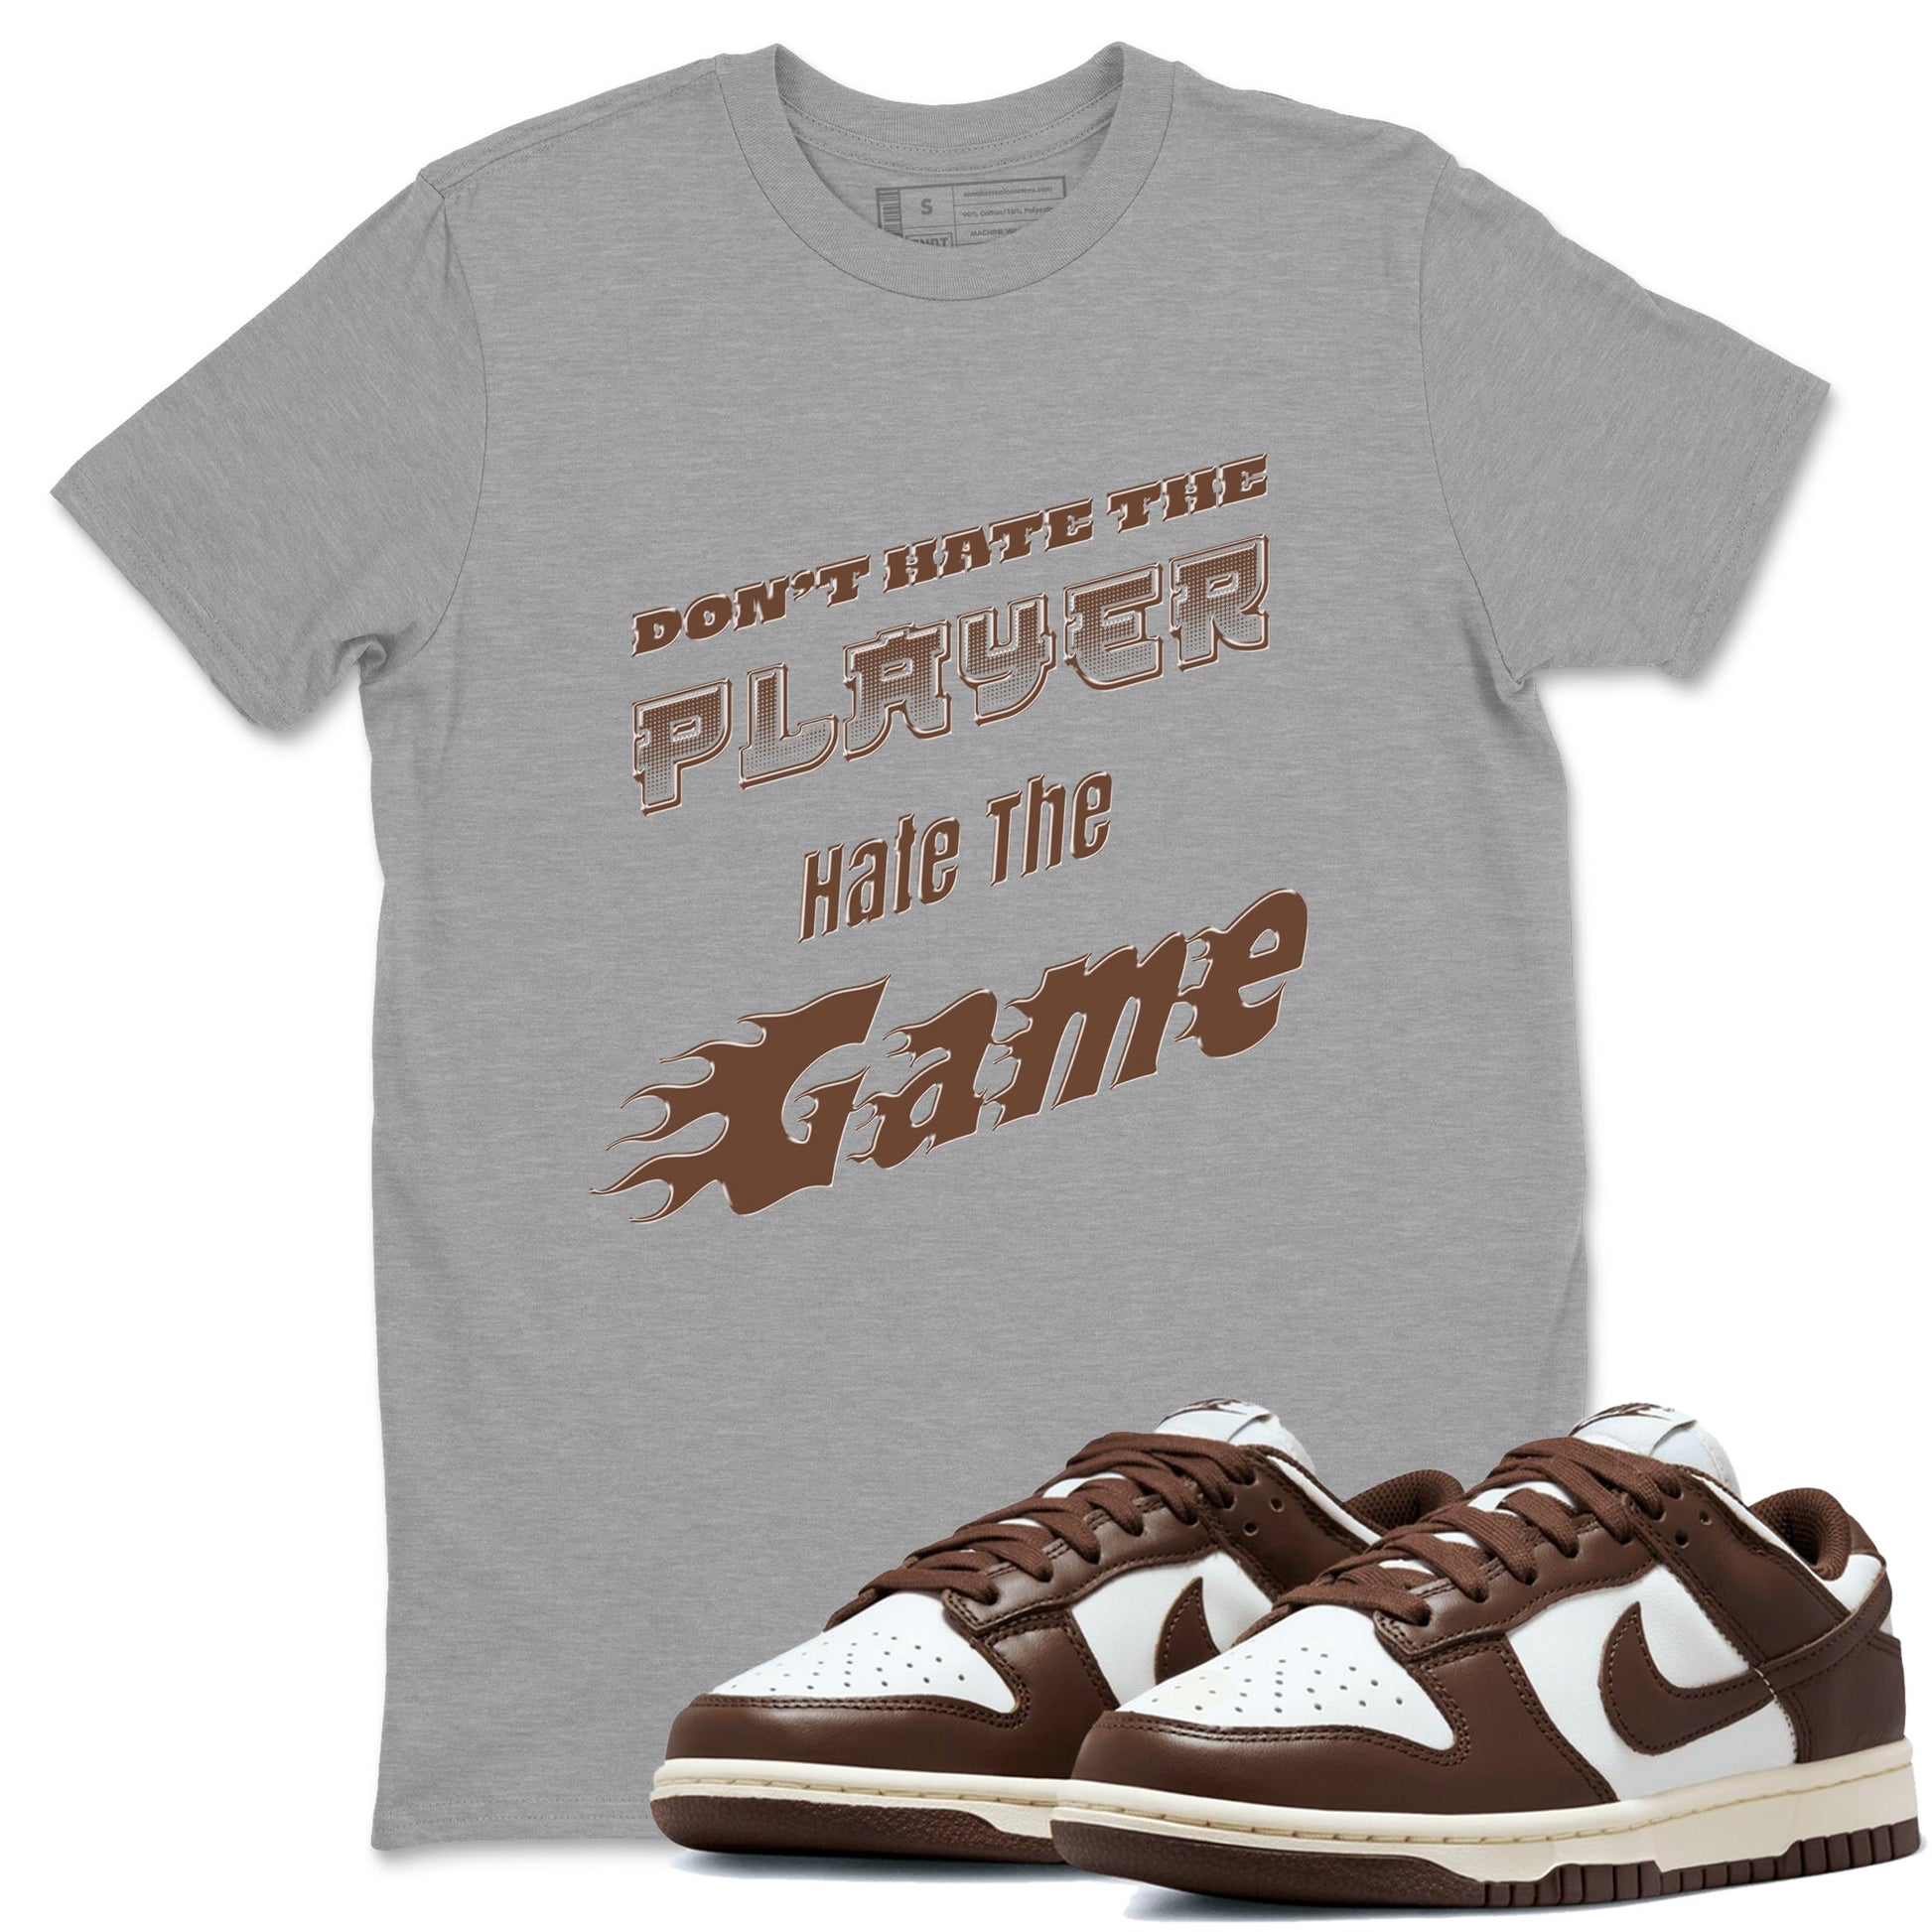 Dunk Cacao Wow shirt to match jordans Don't Hate The Player sneaker tees Dunk Cacao Wow SNRT Sneaker Release Tees Unisex Heather Grey 1 T-Shirt